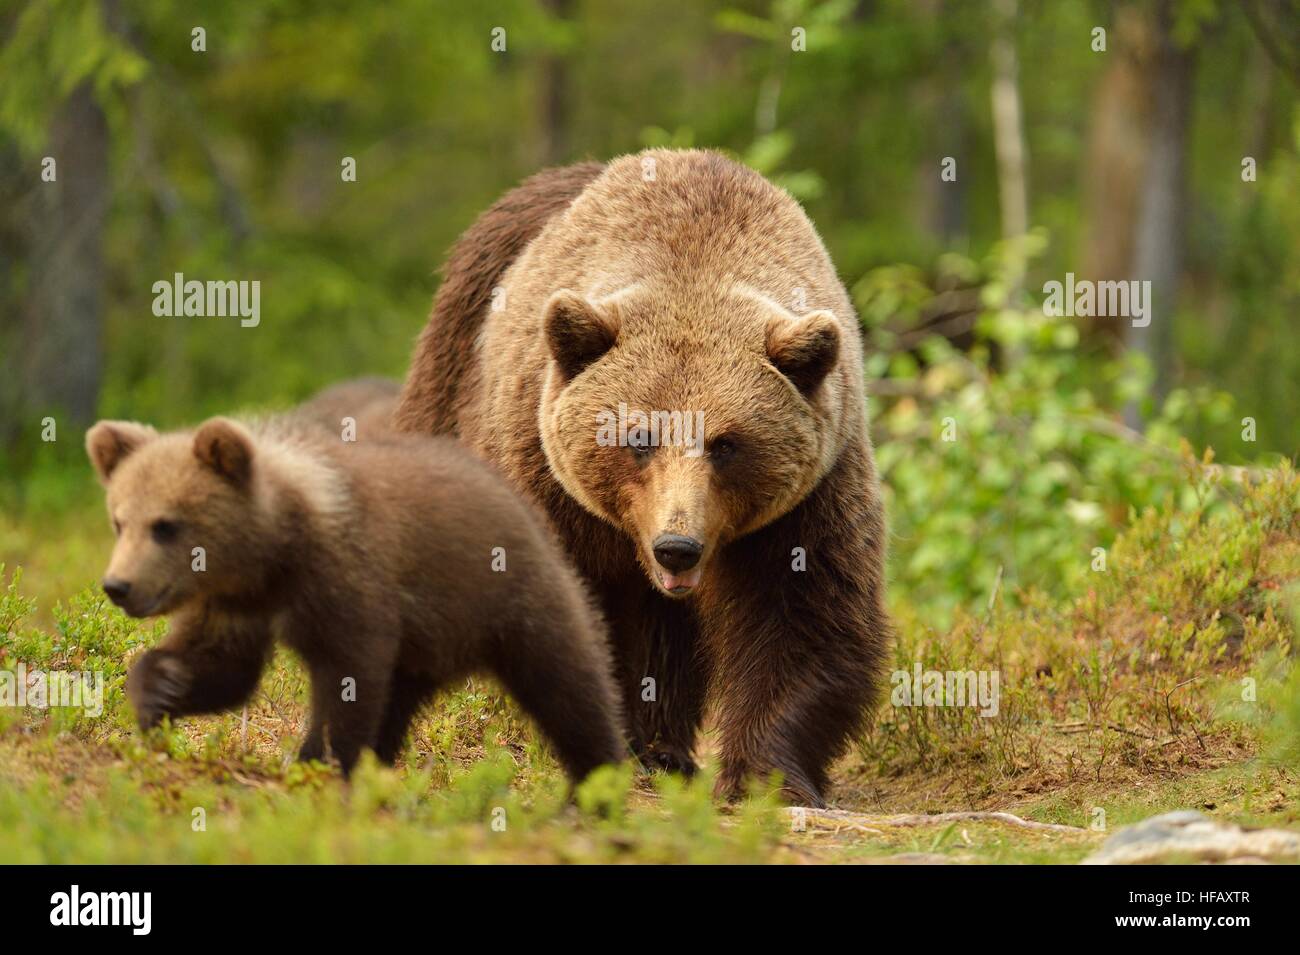 Brown bear with cub in a forest Stock Photo